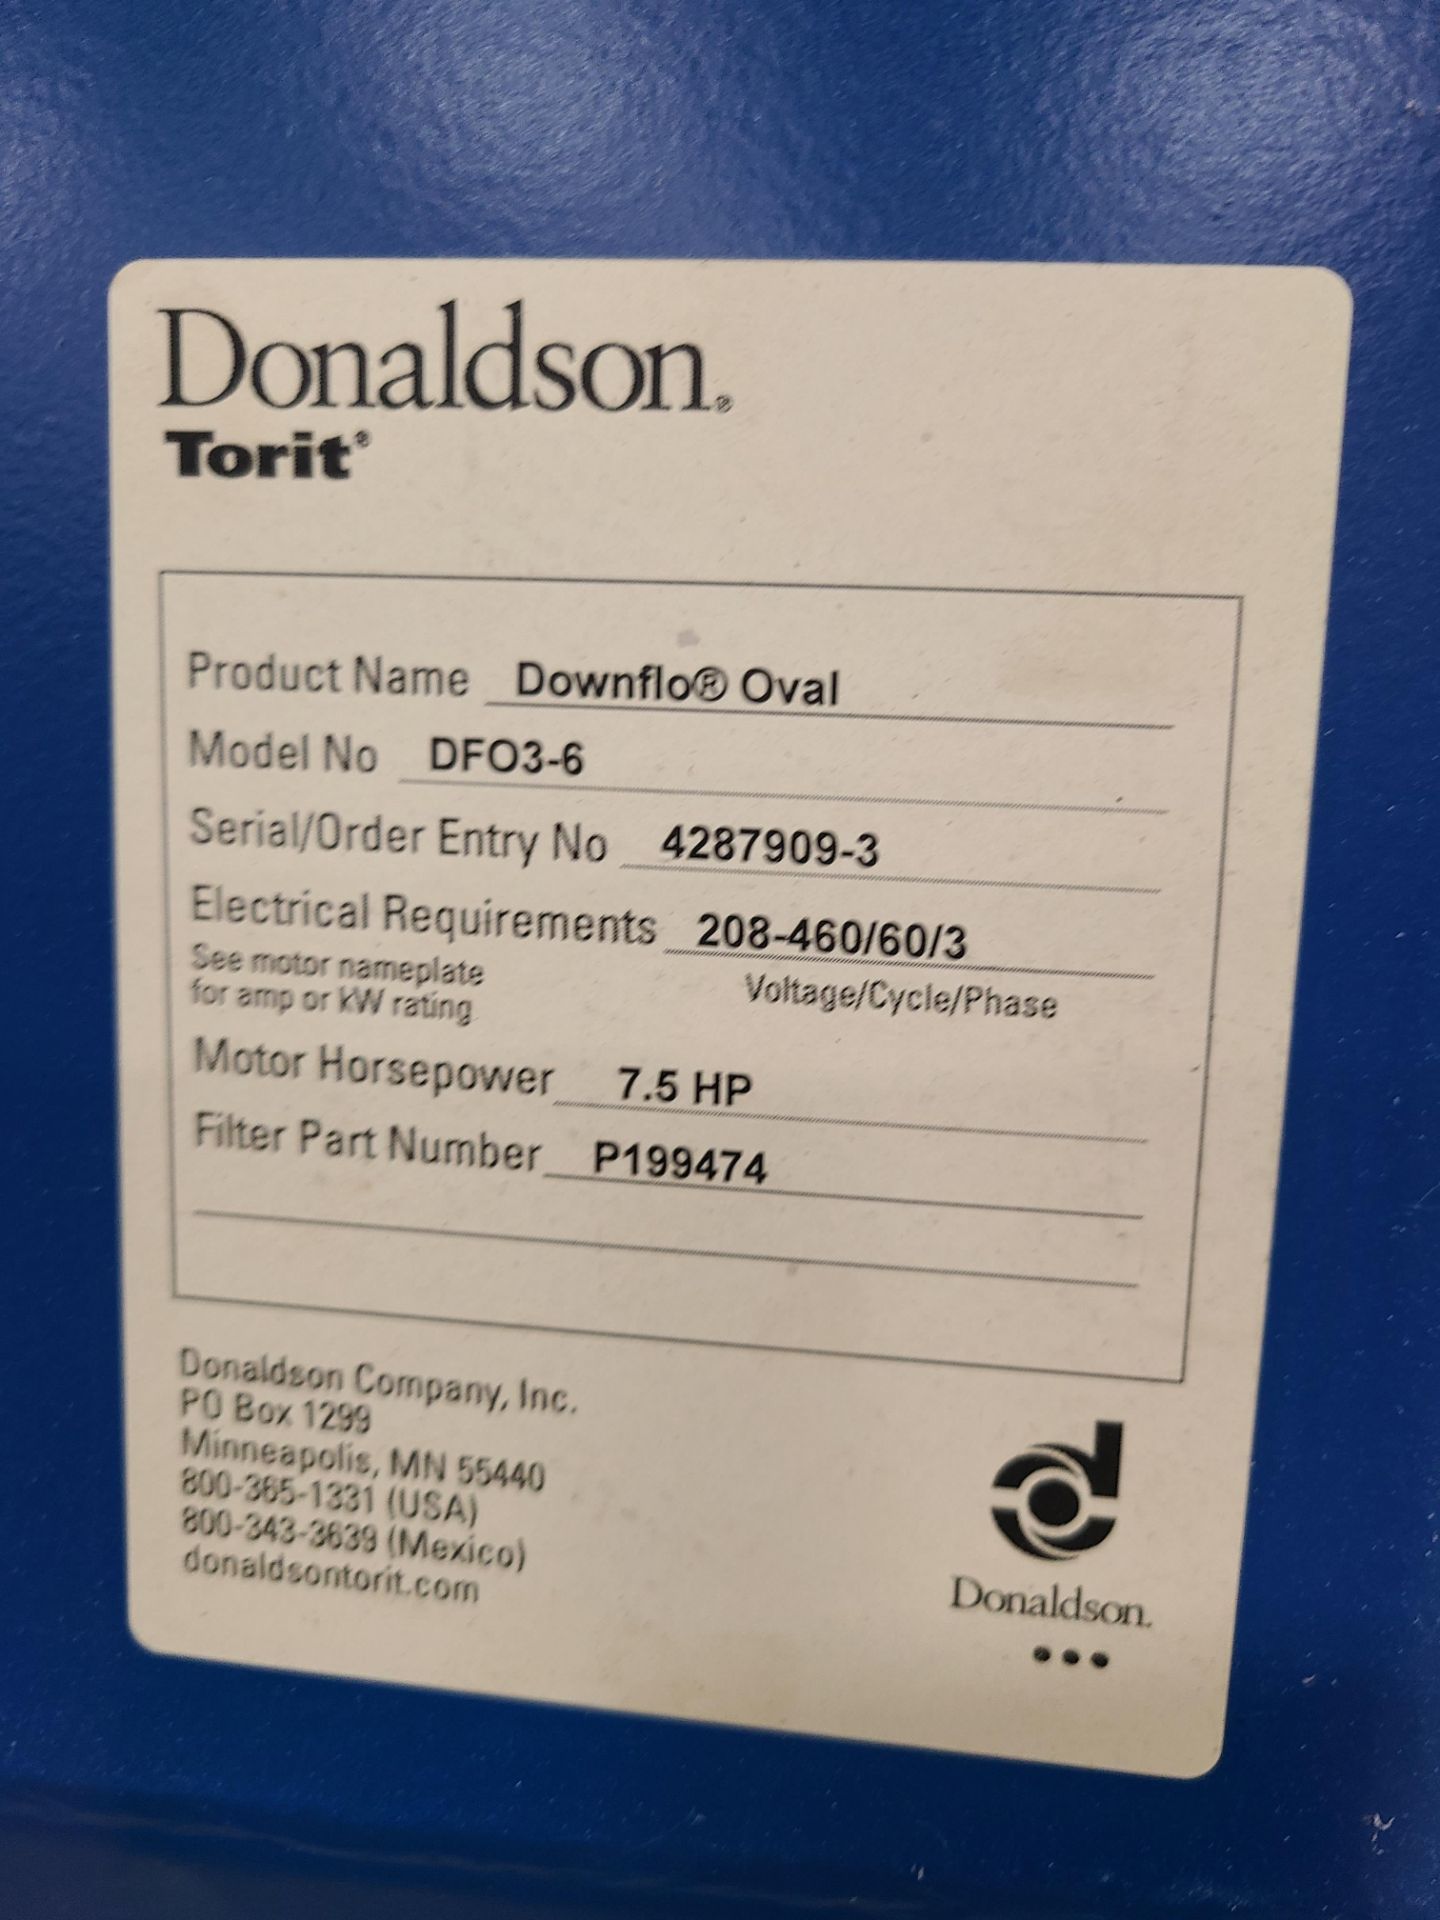 DONALDSON TORIT DOWNFLO OVAL DUST COLLECTOR MODEL # DF03-6 SERIAL # 4287909-3 6 BAG 7.5 HP - Image 2 of 3